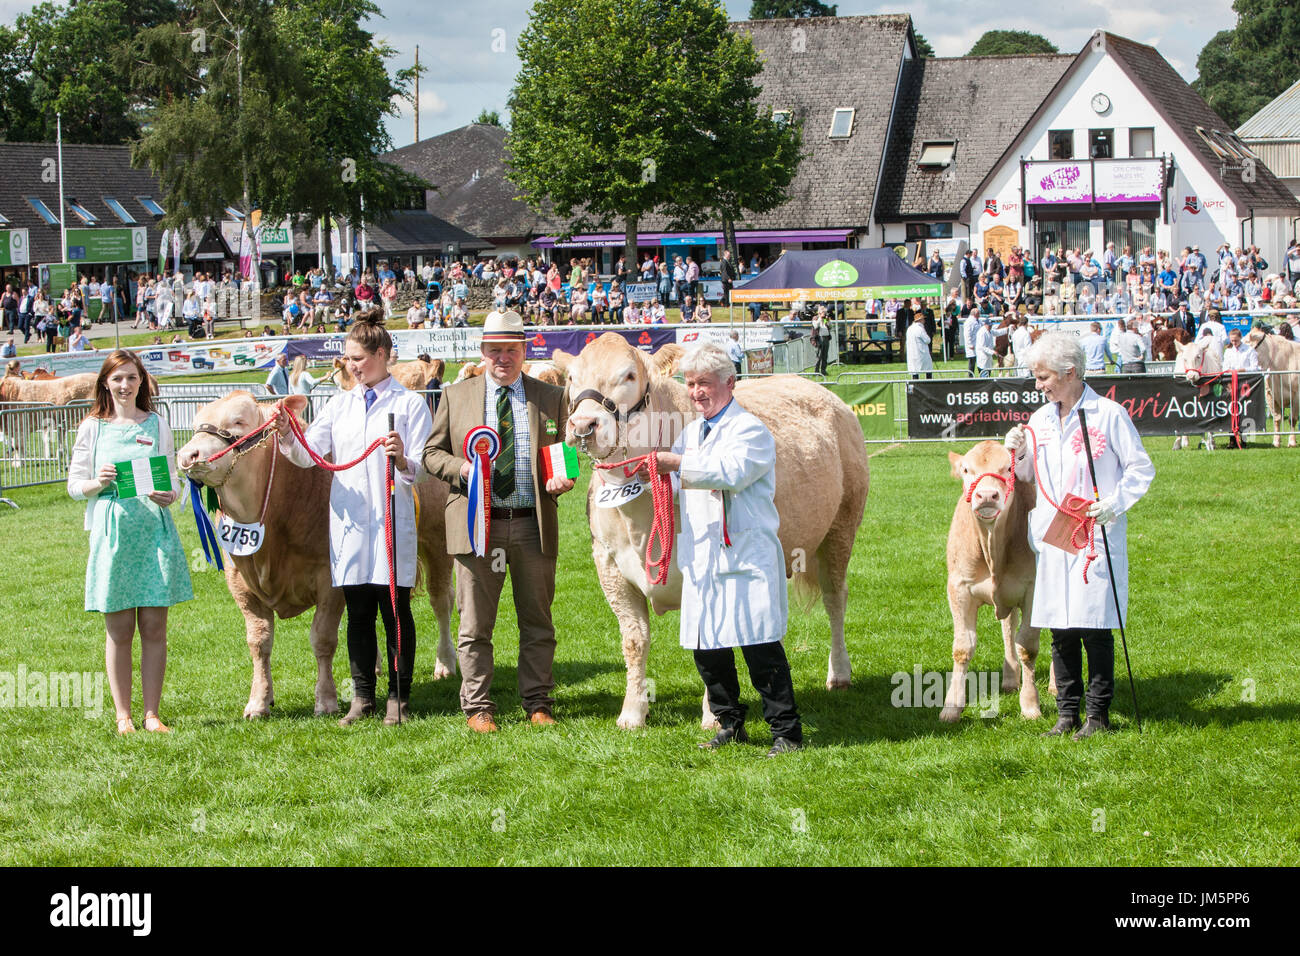 Royal Welsh Agricultural Show,held,annually,at, Royal Welsh Showground,Llanelwedd,Builth Wells,Powys,Wales,UK,U.K.,Europe, Stock Photo